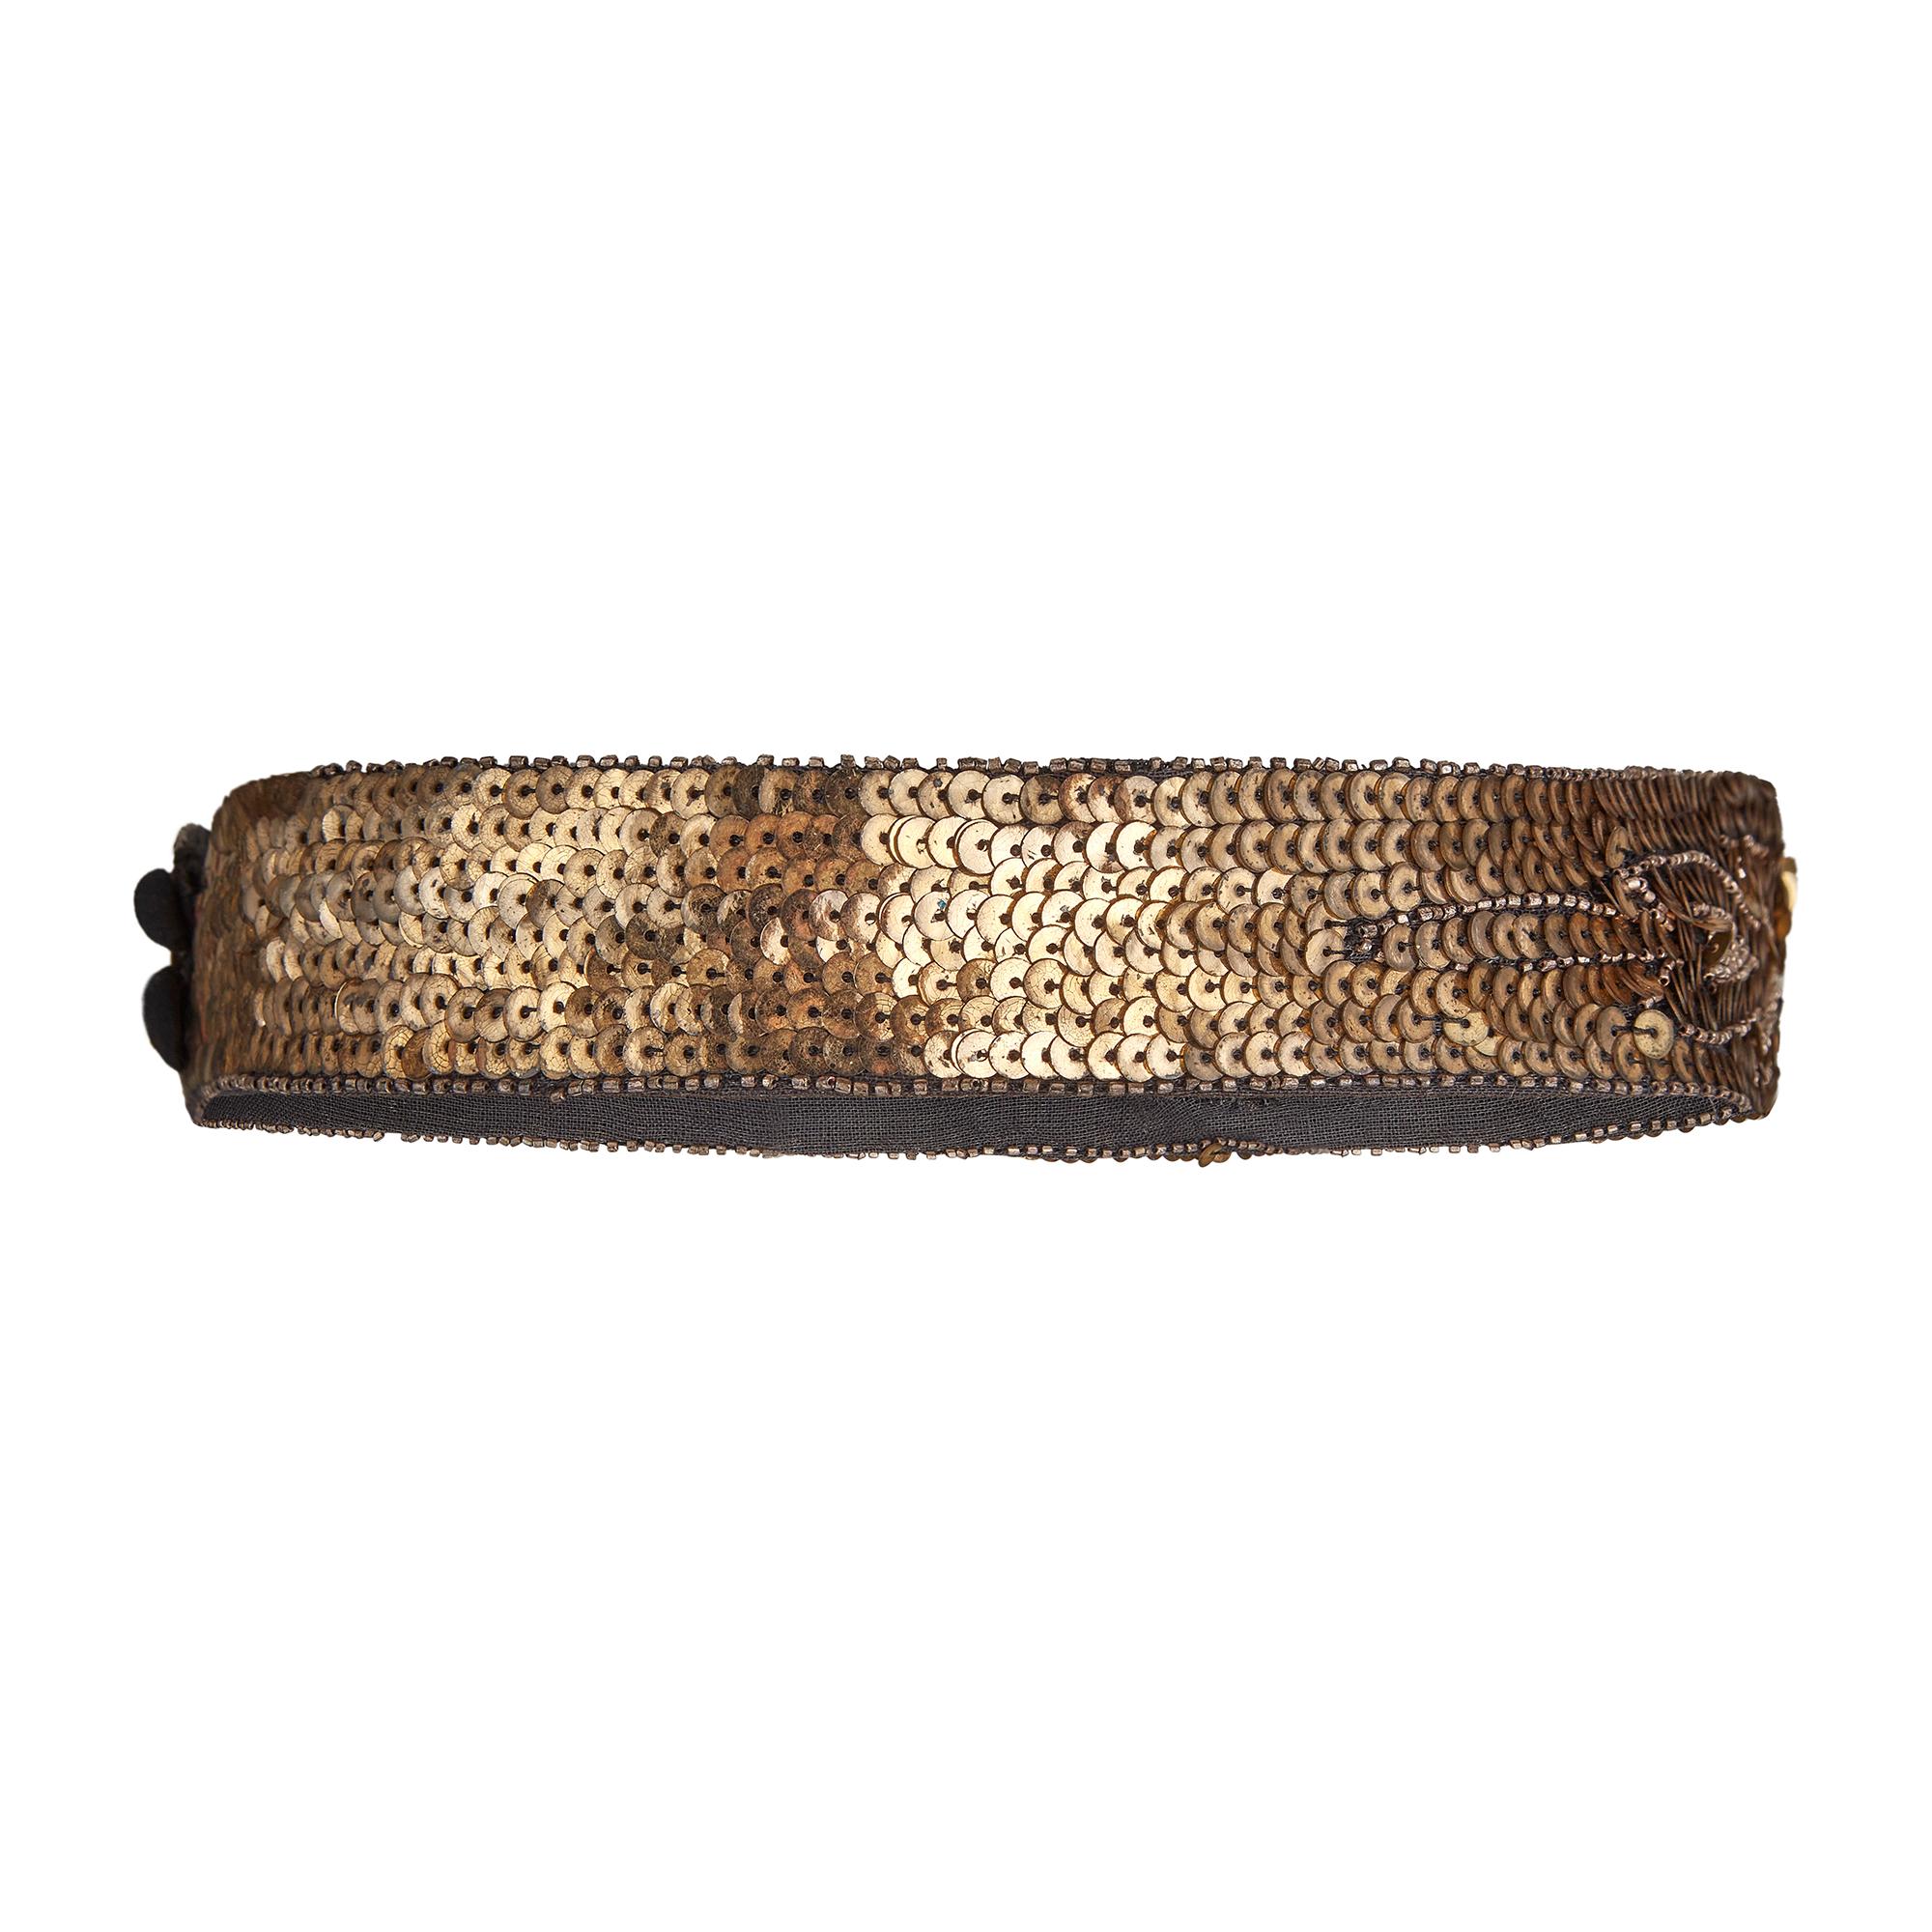 Burnished gold sequins sit upon darkest grey linen cloth on this late 1920s to early 1930s made belt. The wider front of the belt displays sequins arranged in an Art Deco motive with abstract patterns swirling out towards the edges.  Interspersed